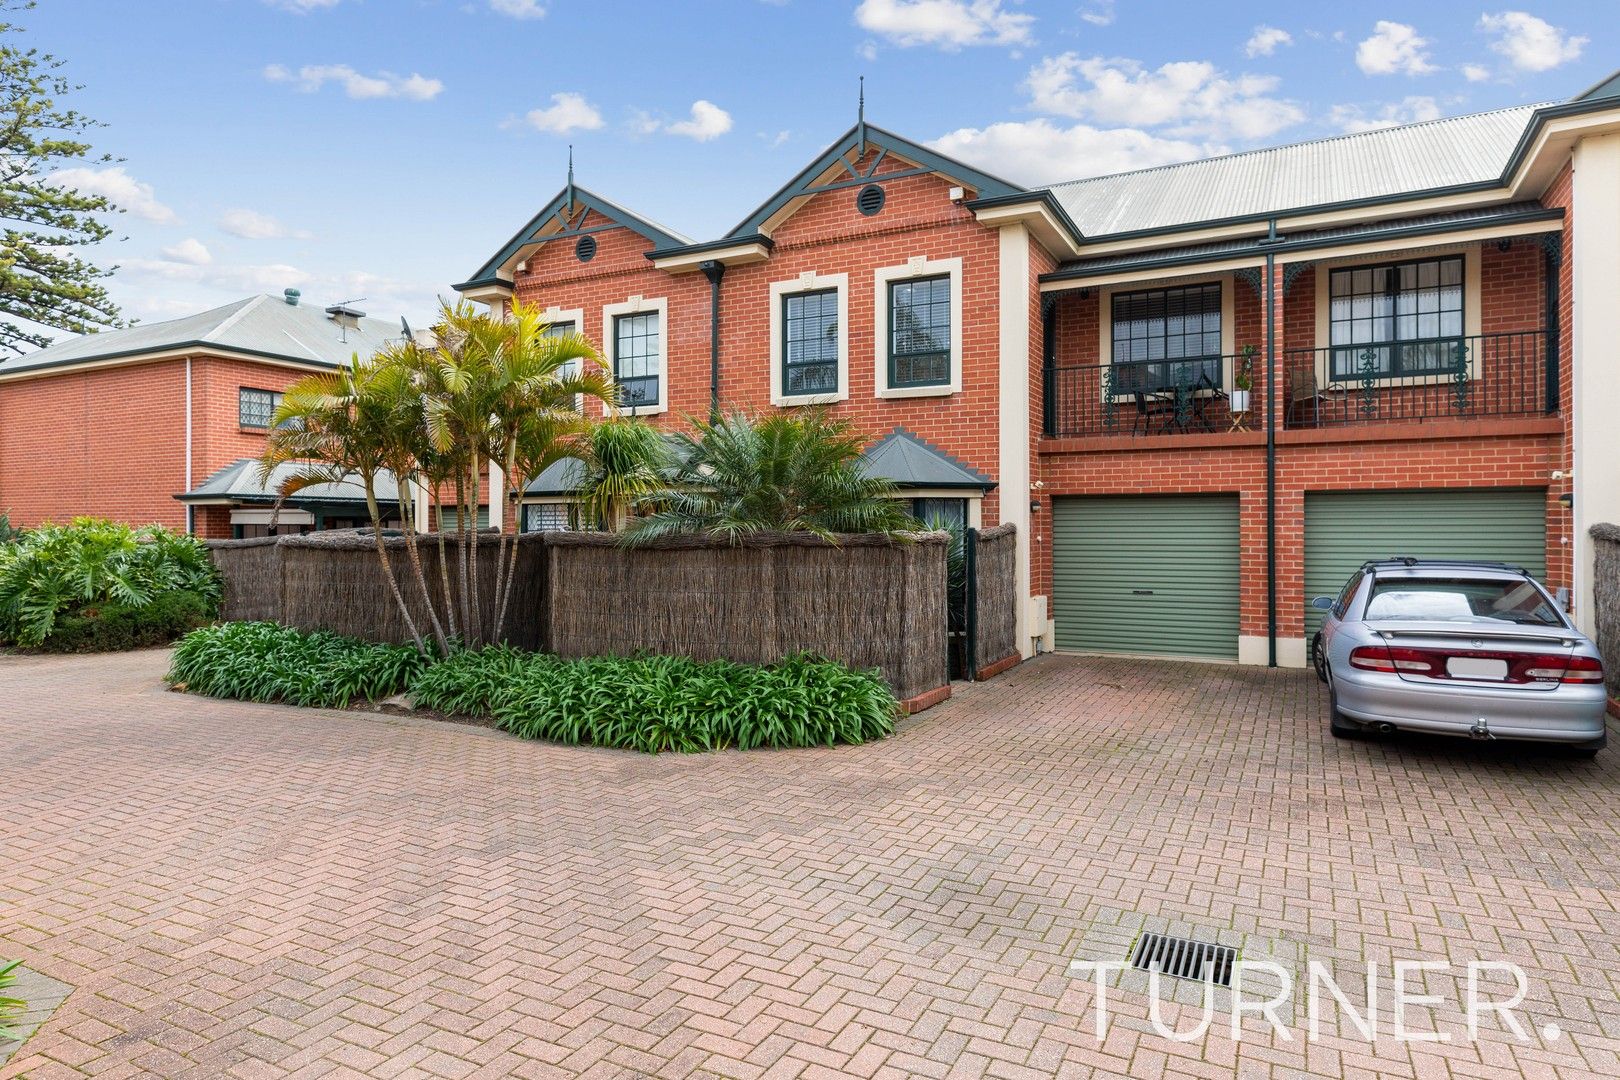 3 bedrooms Townhouse in 6/12 Old Tapleys Hill Road GLENELG NORTH SA, 5045